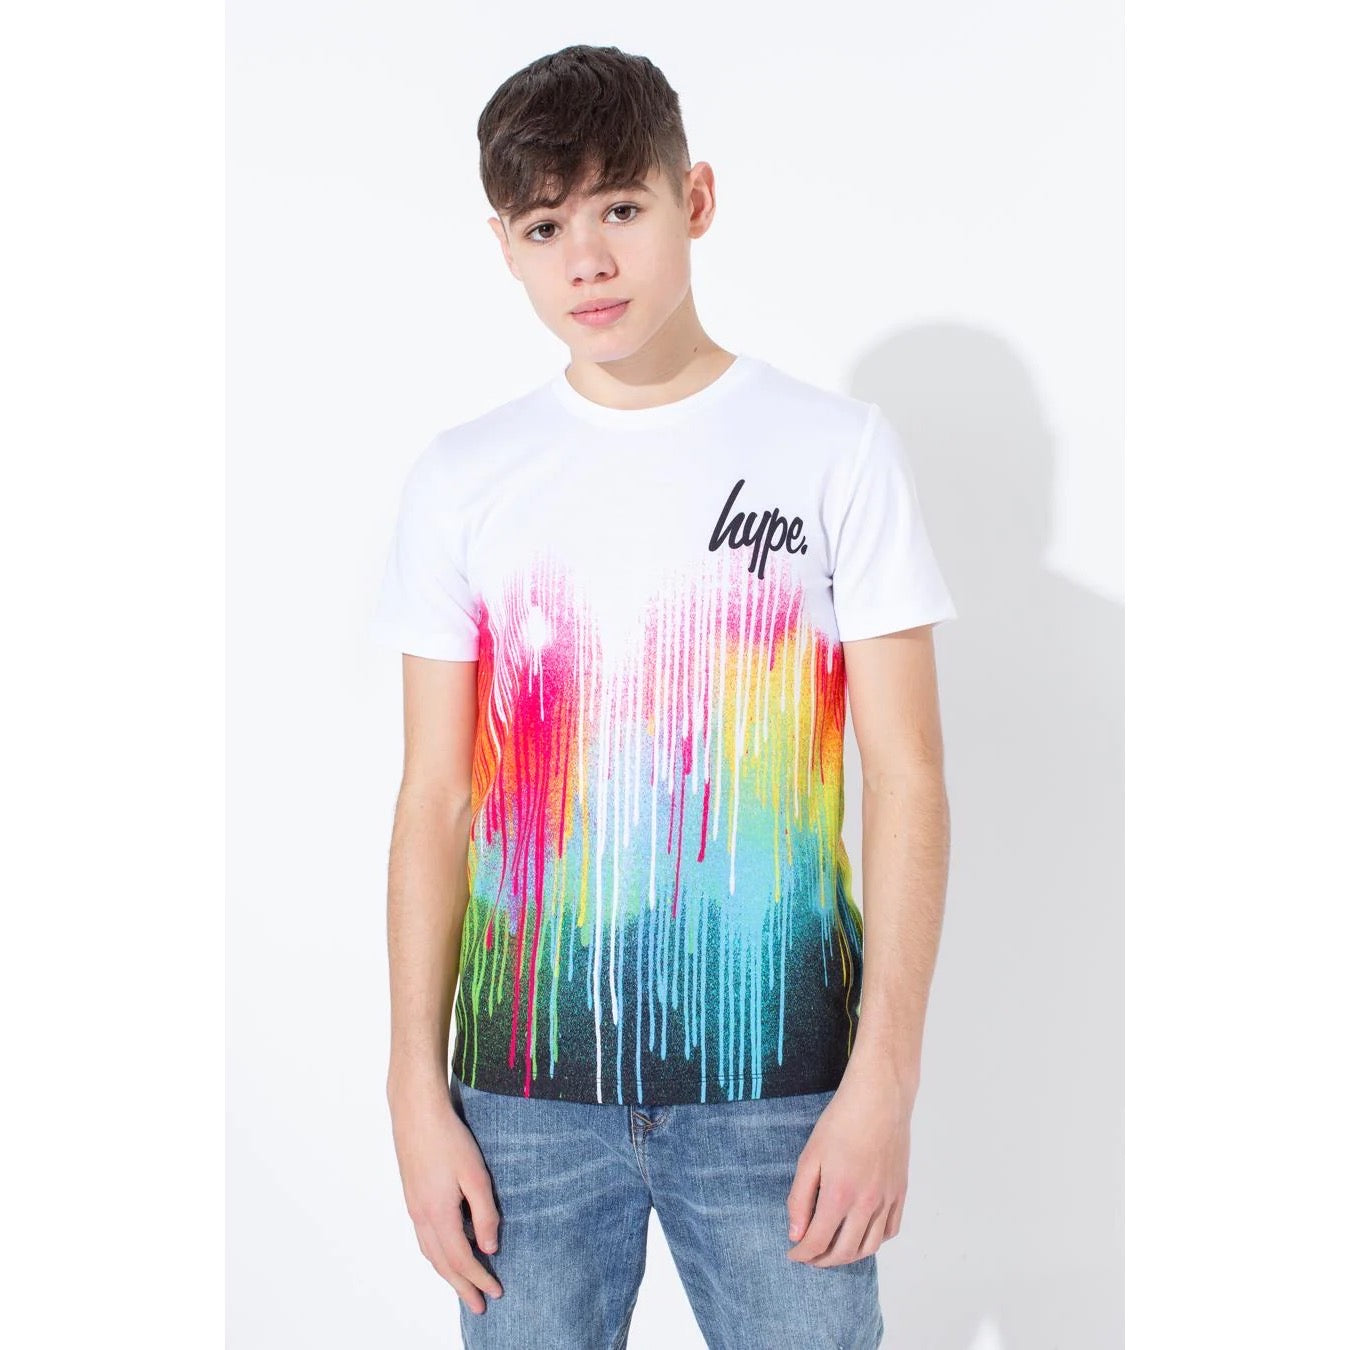 Hype Bright Drips T-Shirt Dt001 Clothing 9/10YRS / Multi,11/12YRS / Multi,13YRS / Multi,14YRS / Multi,15YRS / Multi